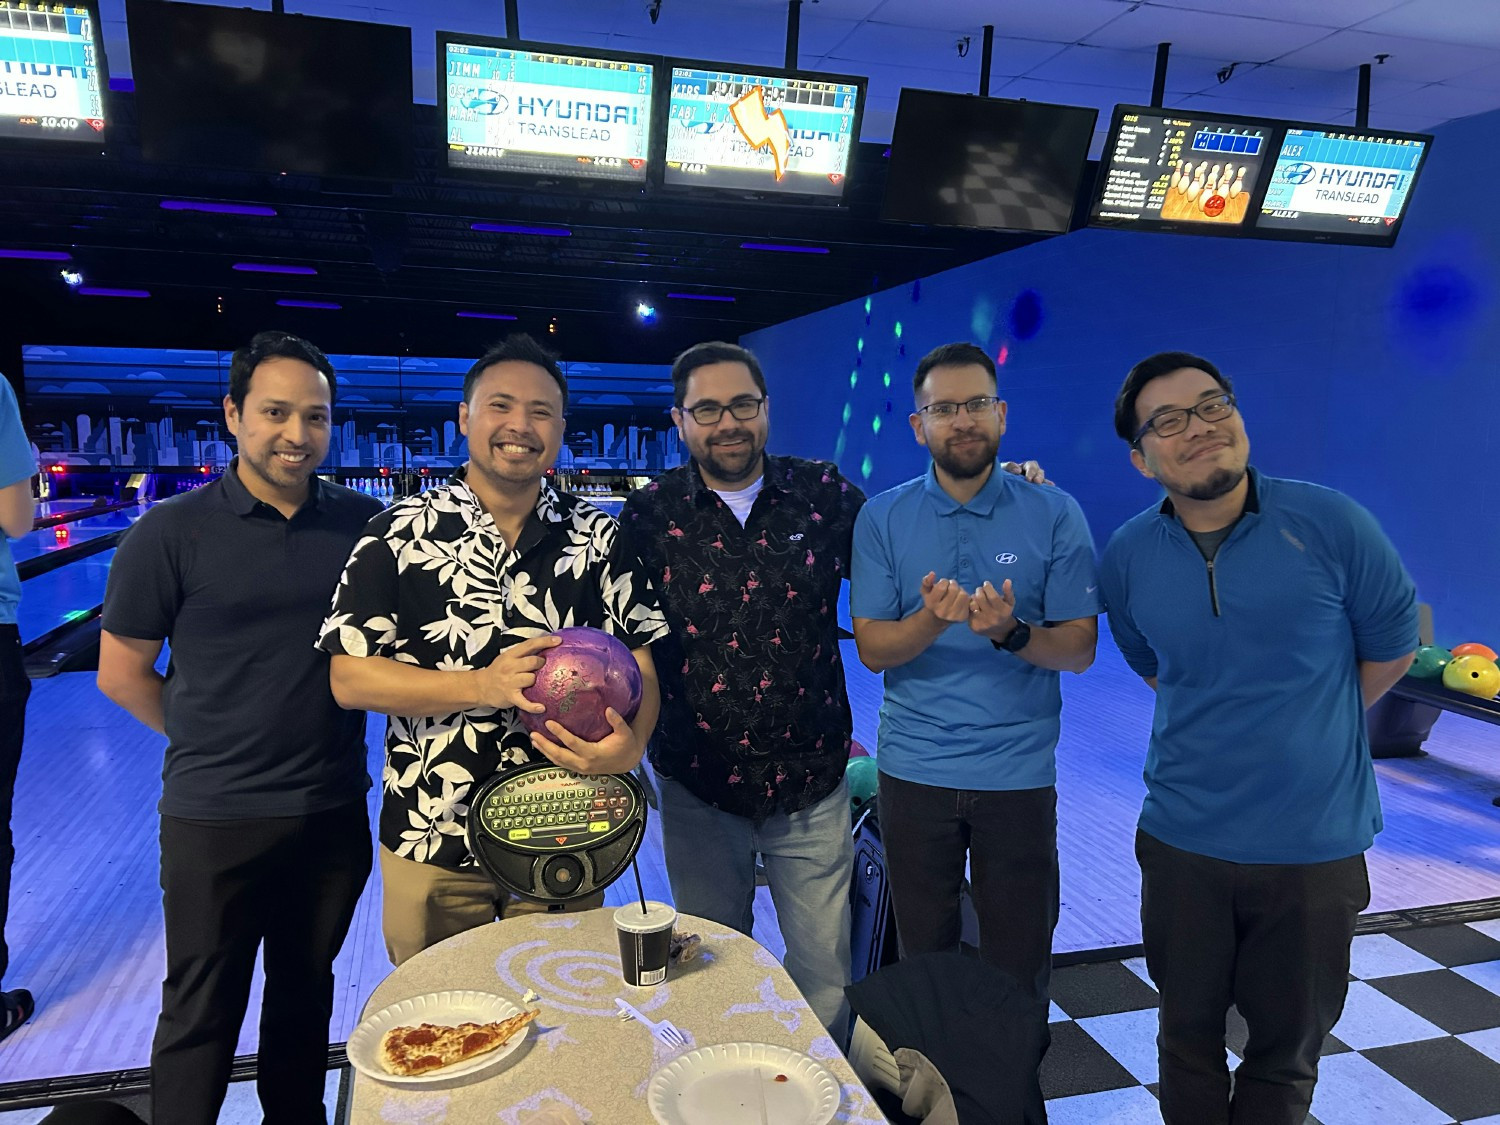 TEAM MEMBERS TEAM UP AND ENJOYED A HEALTHY
COMPTETITION DURING OUR BOWLING TOURNAMENT.